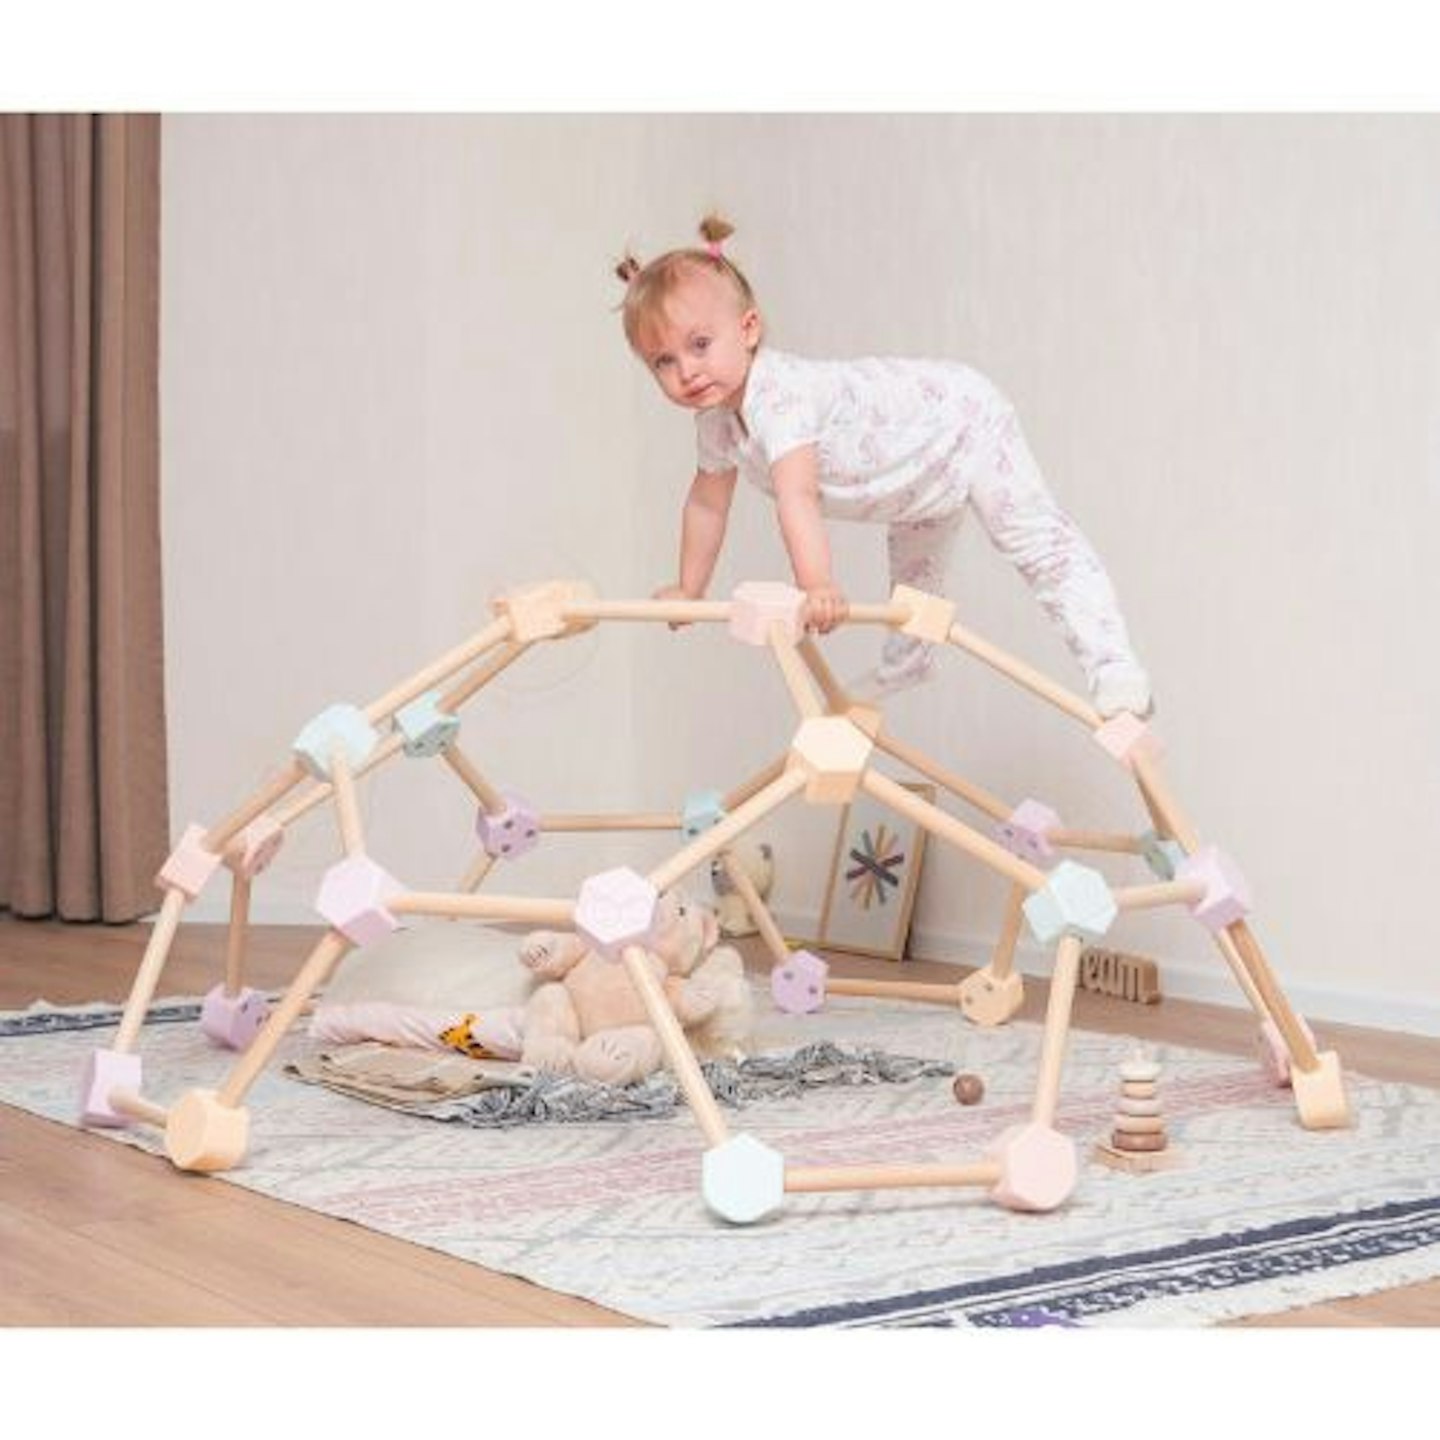 Best indoor climbers for toddlers Spider Web Montessori Play Gym